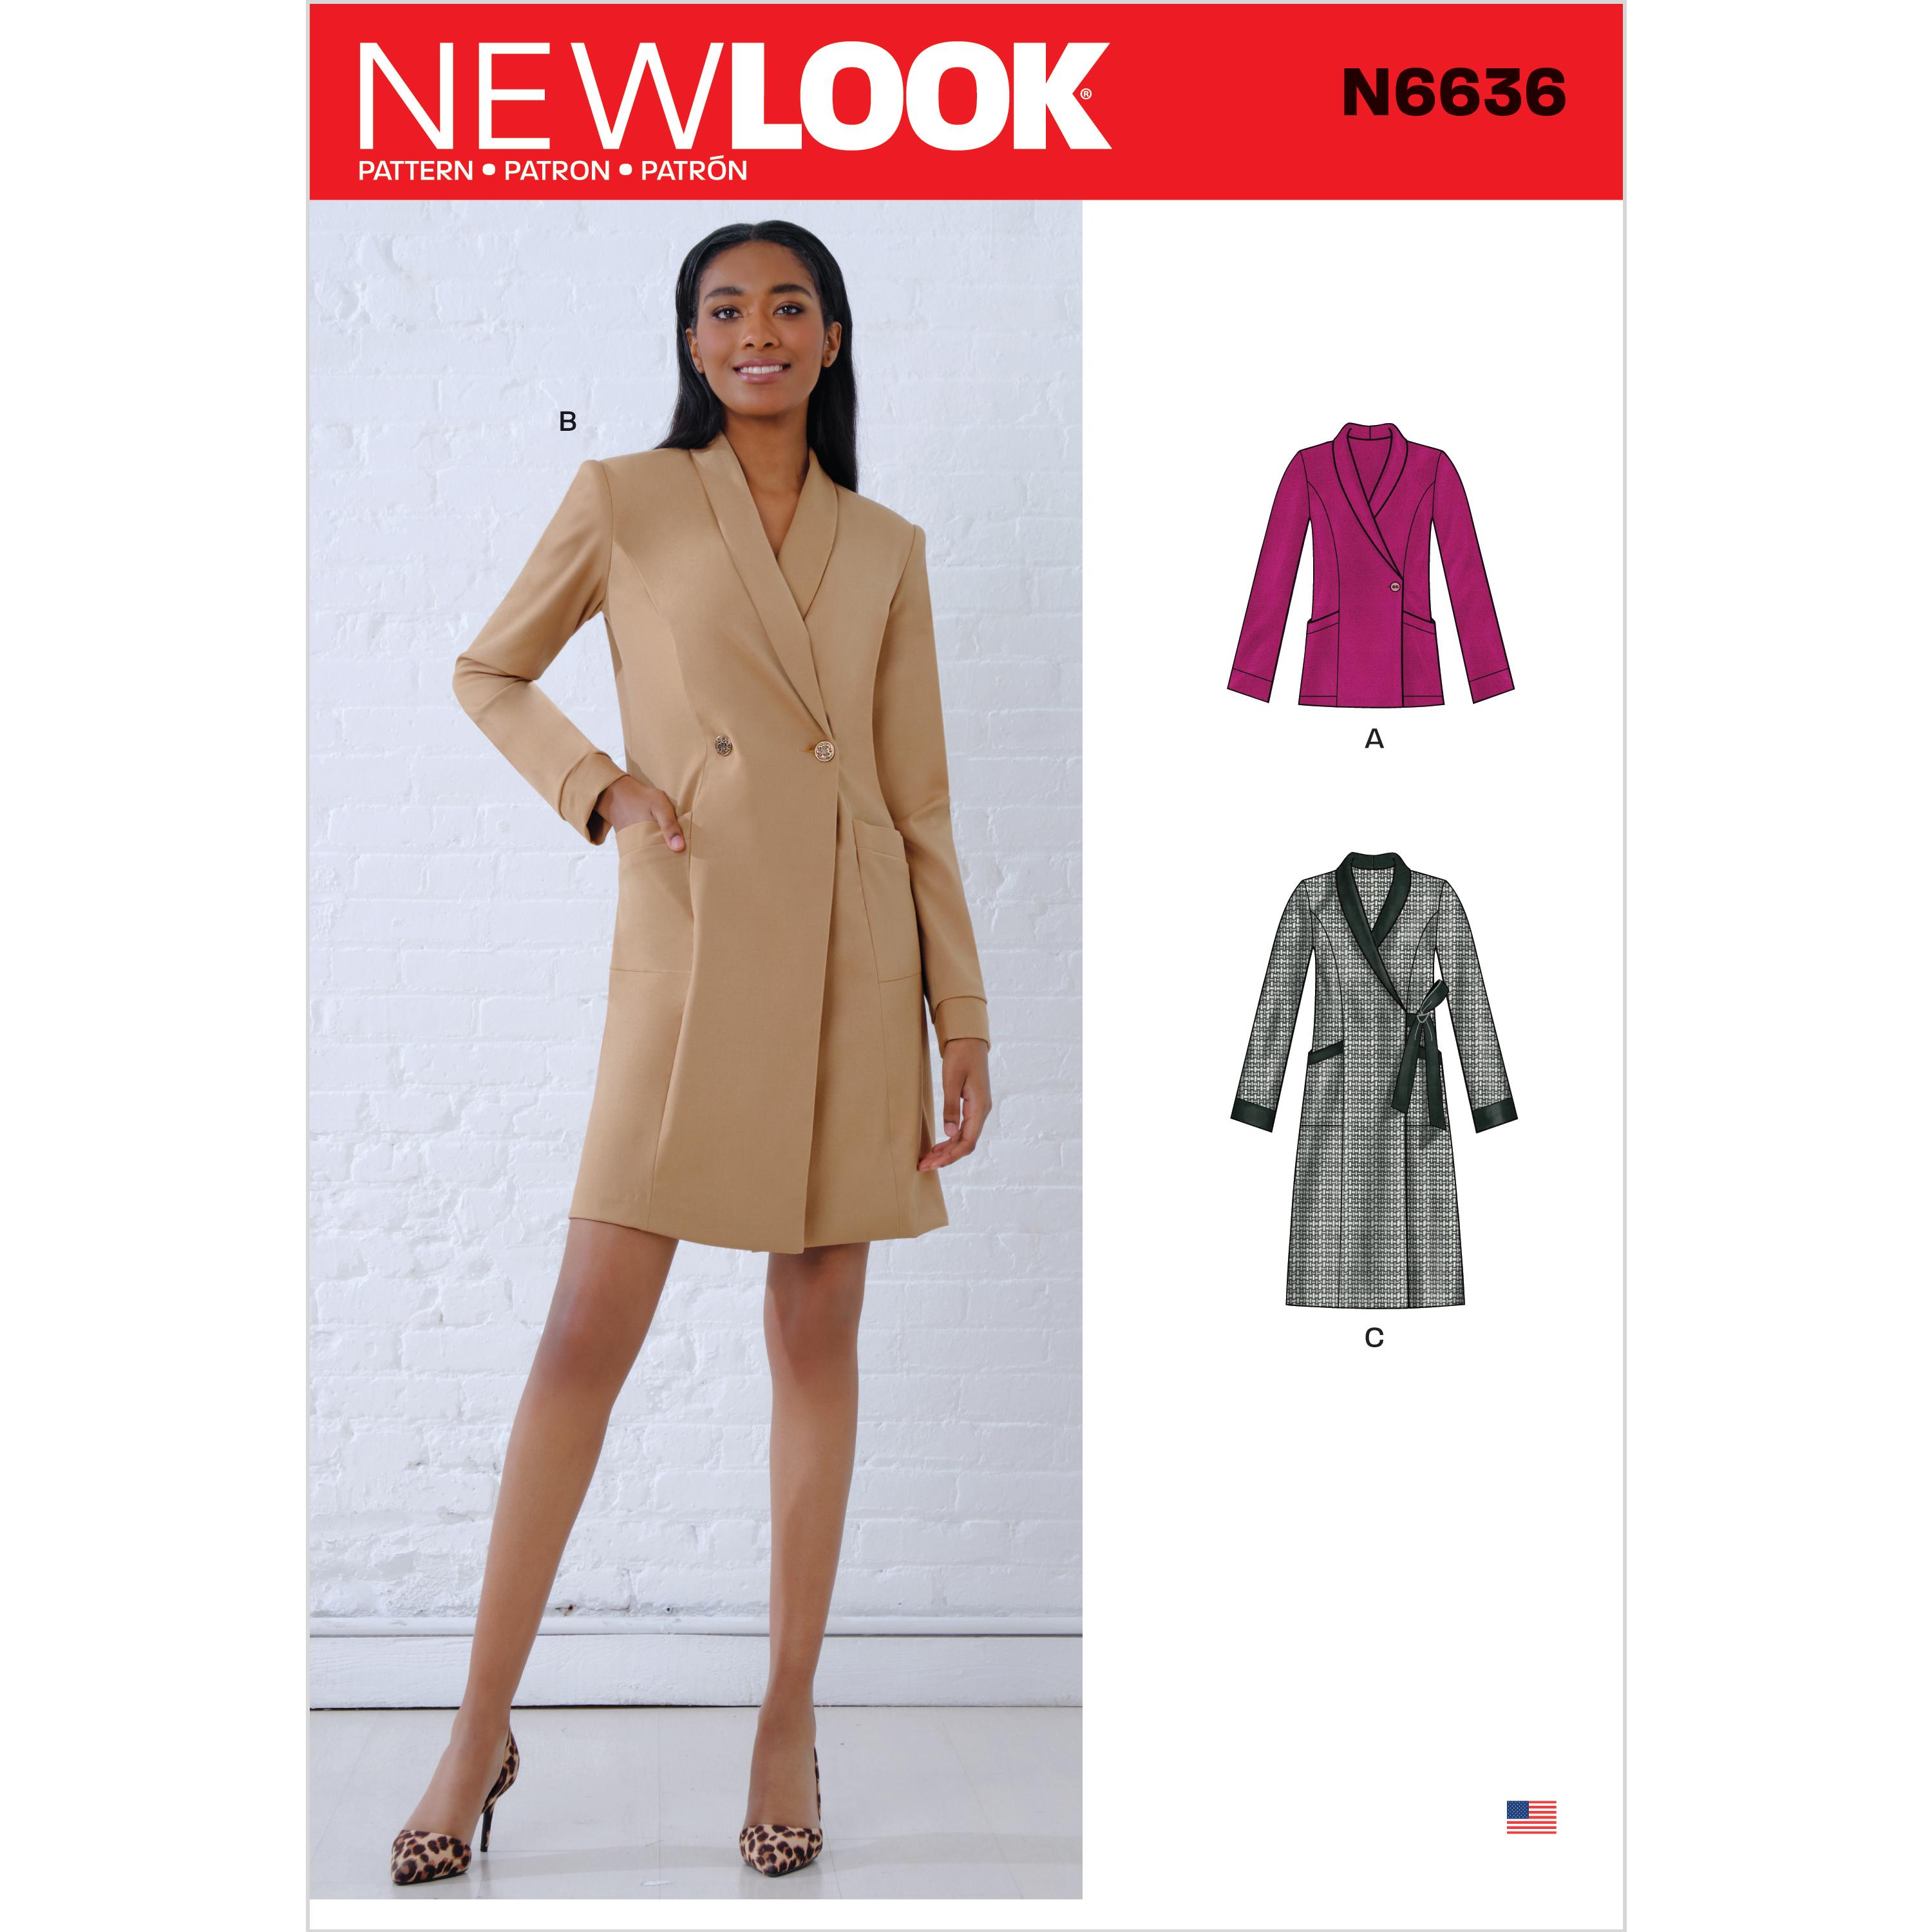 NewLook Sewing Pattern N6636 Misses' Dresses and Blazer